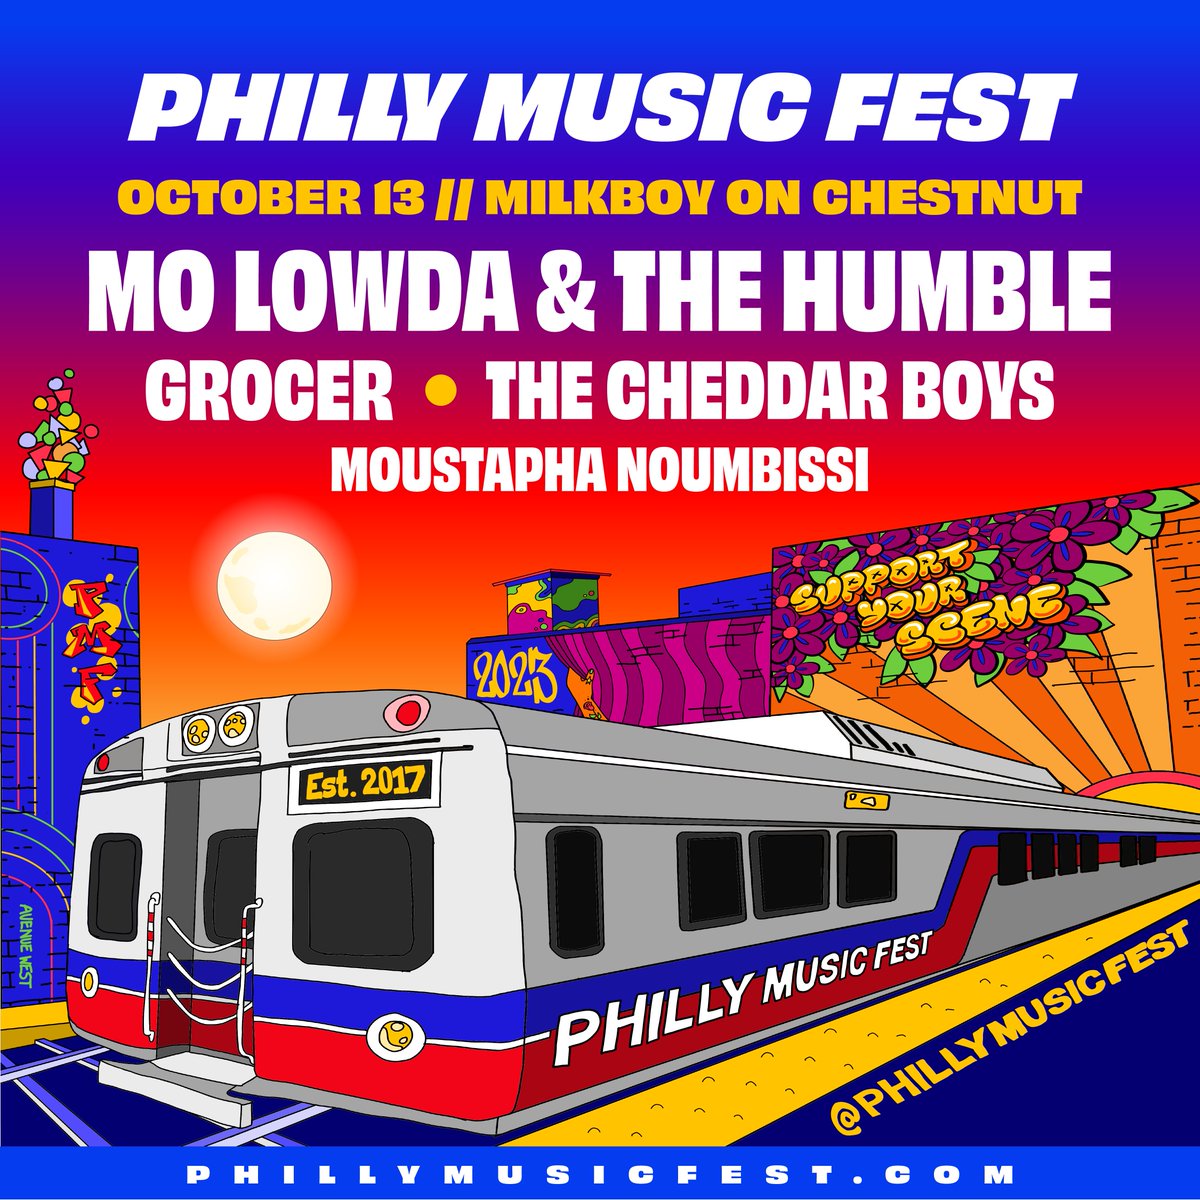 The rumors are true 😱 We're joining Philly Music Fest once again for a super stacked night with some of the city's best musicians 🥳 October 13 we welcome @MoLowda, @ItsGrocer and more to the MilkBoy stage! 

Tickets go on sale Friday at 10am >> milkboyphilly.com